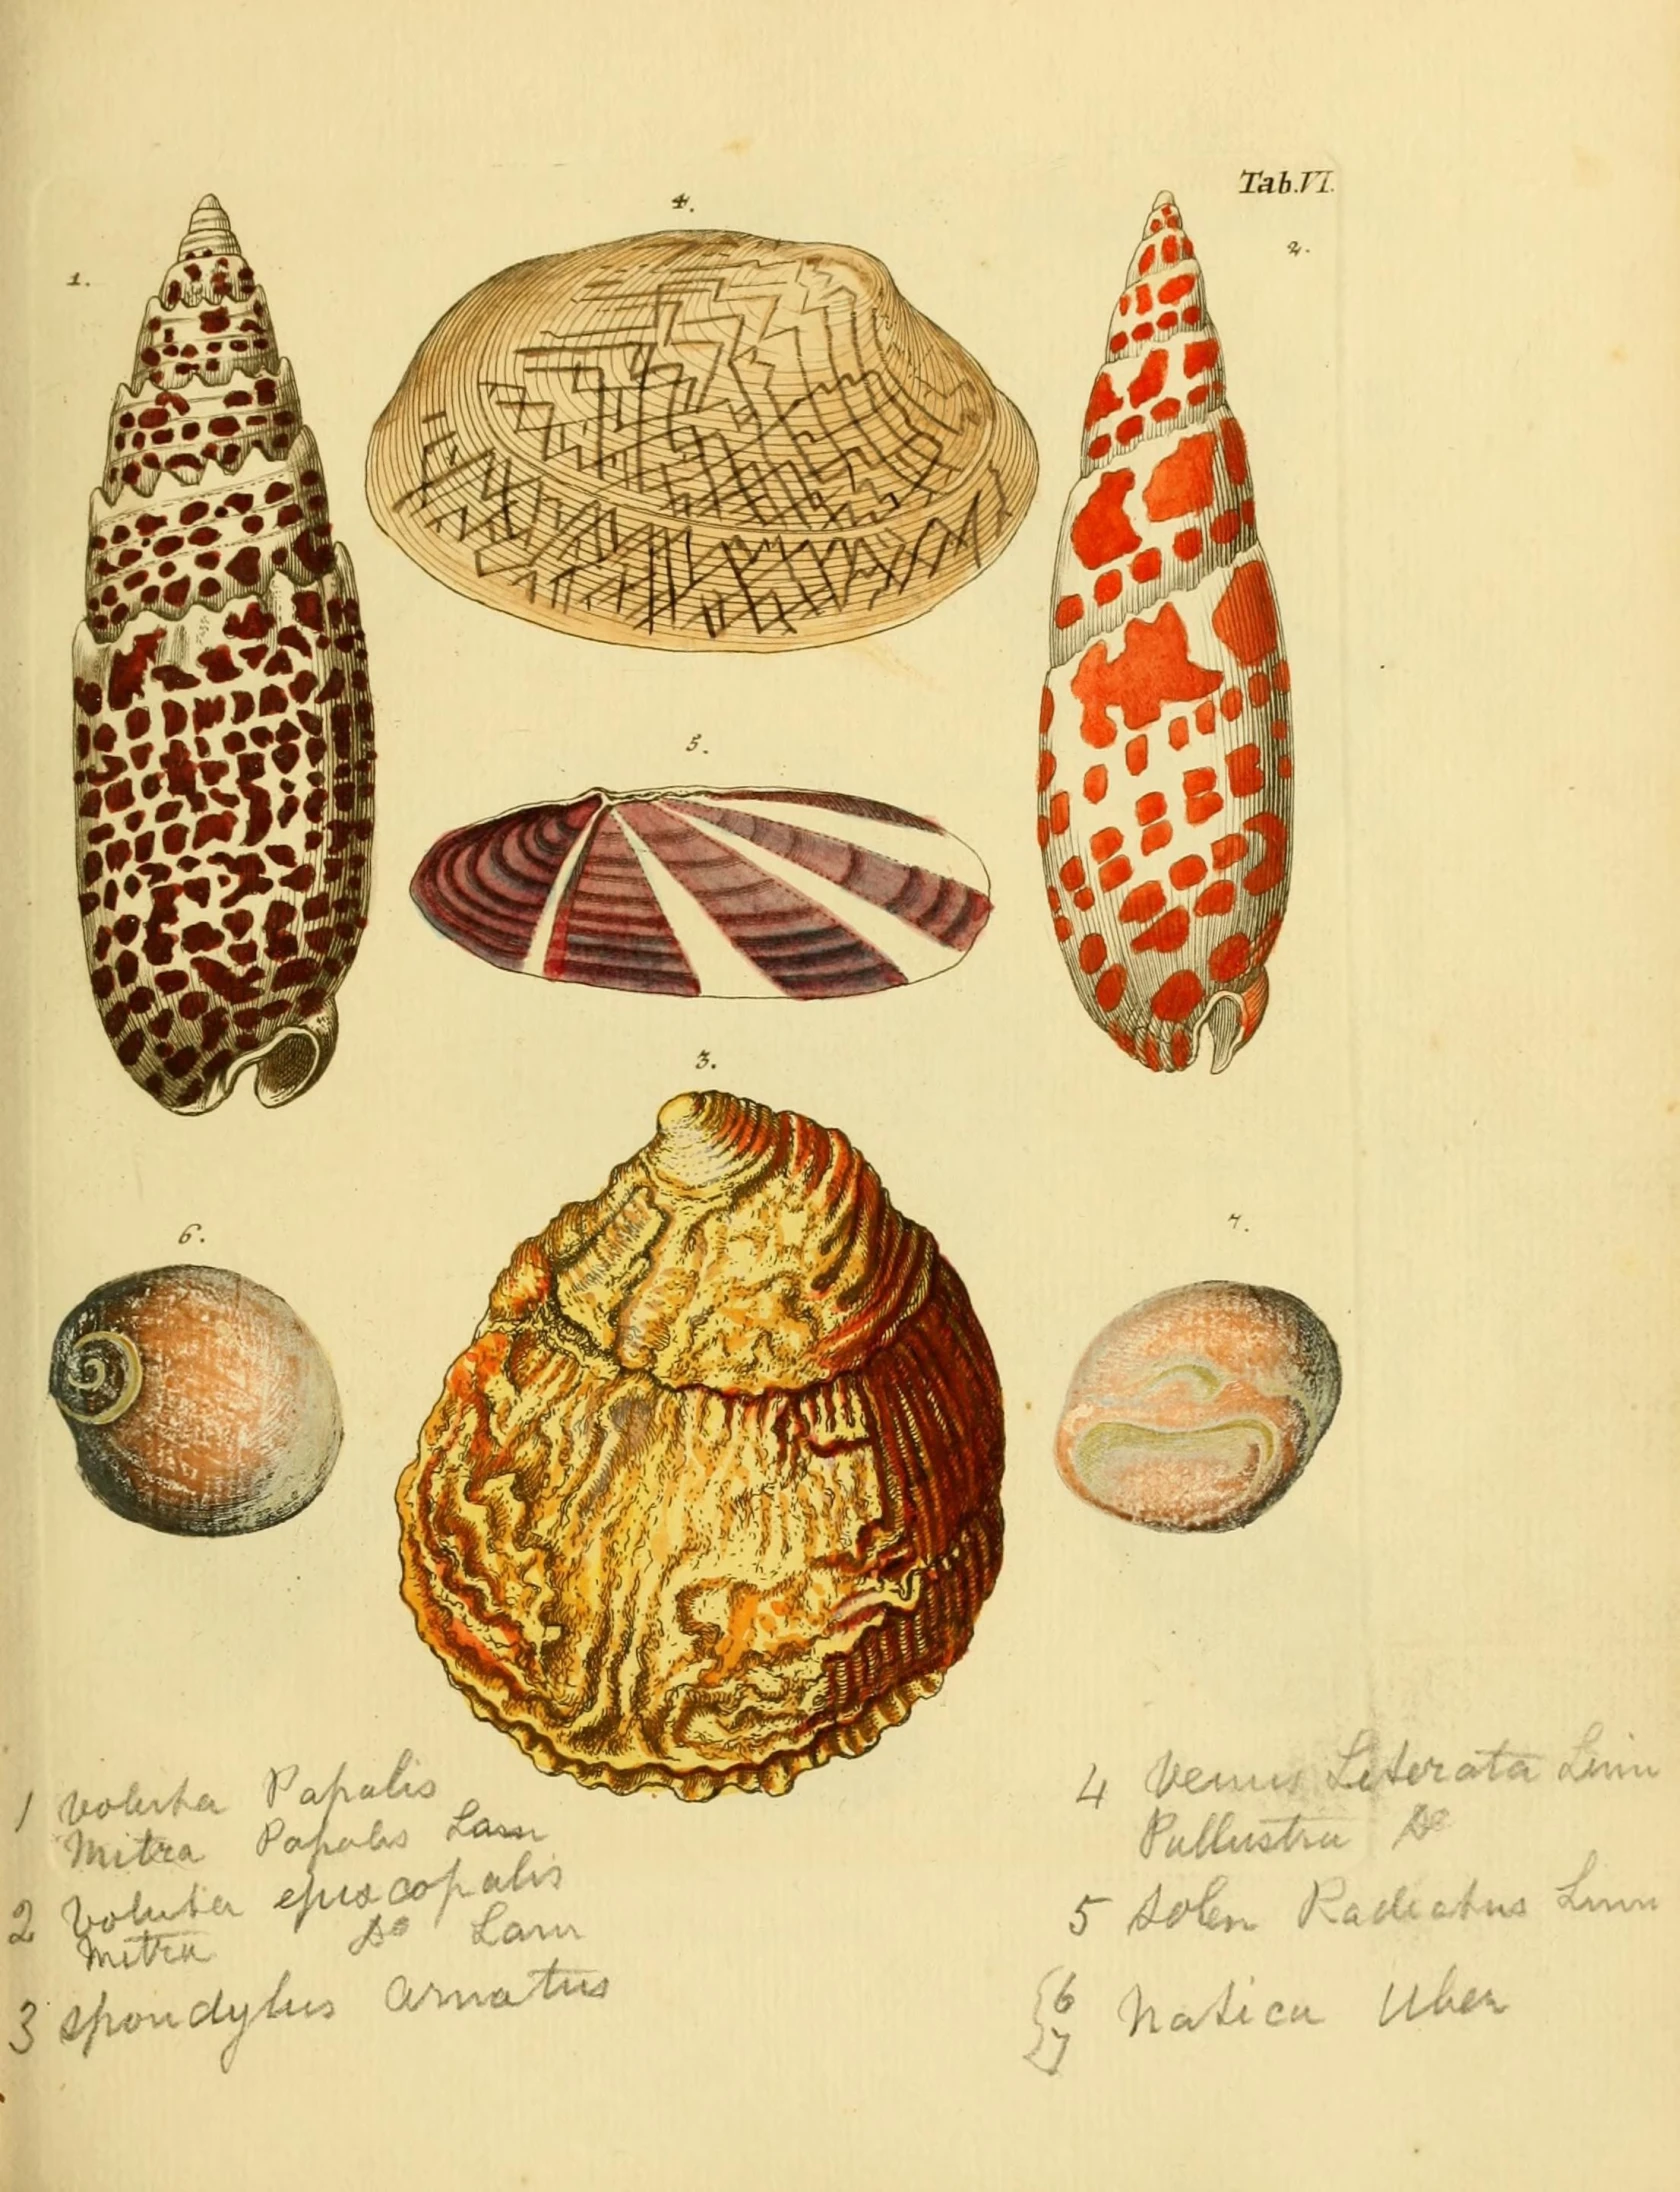 two illustrations of sea shells, each with different patterns